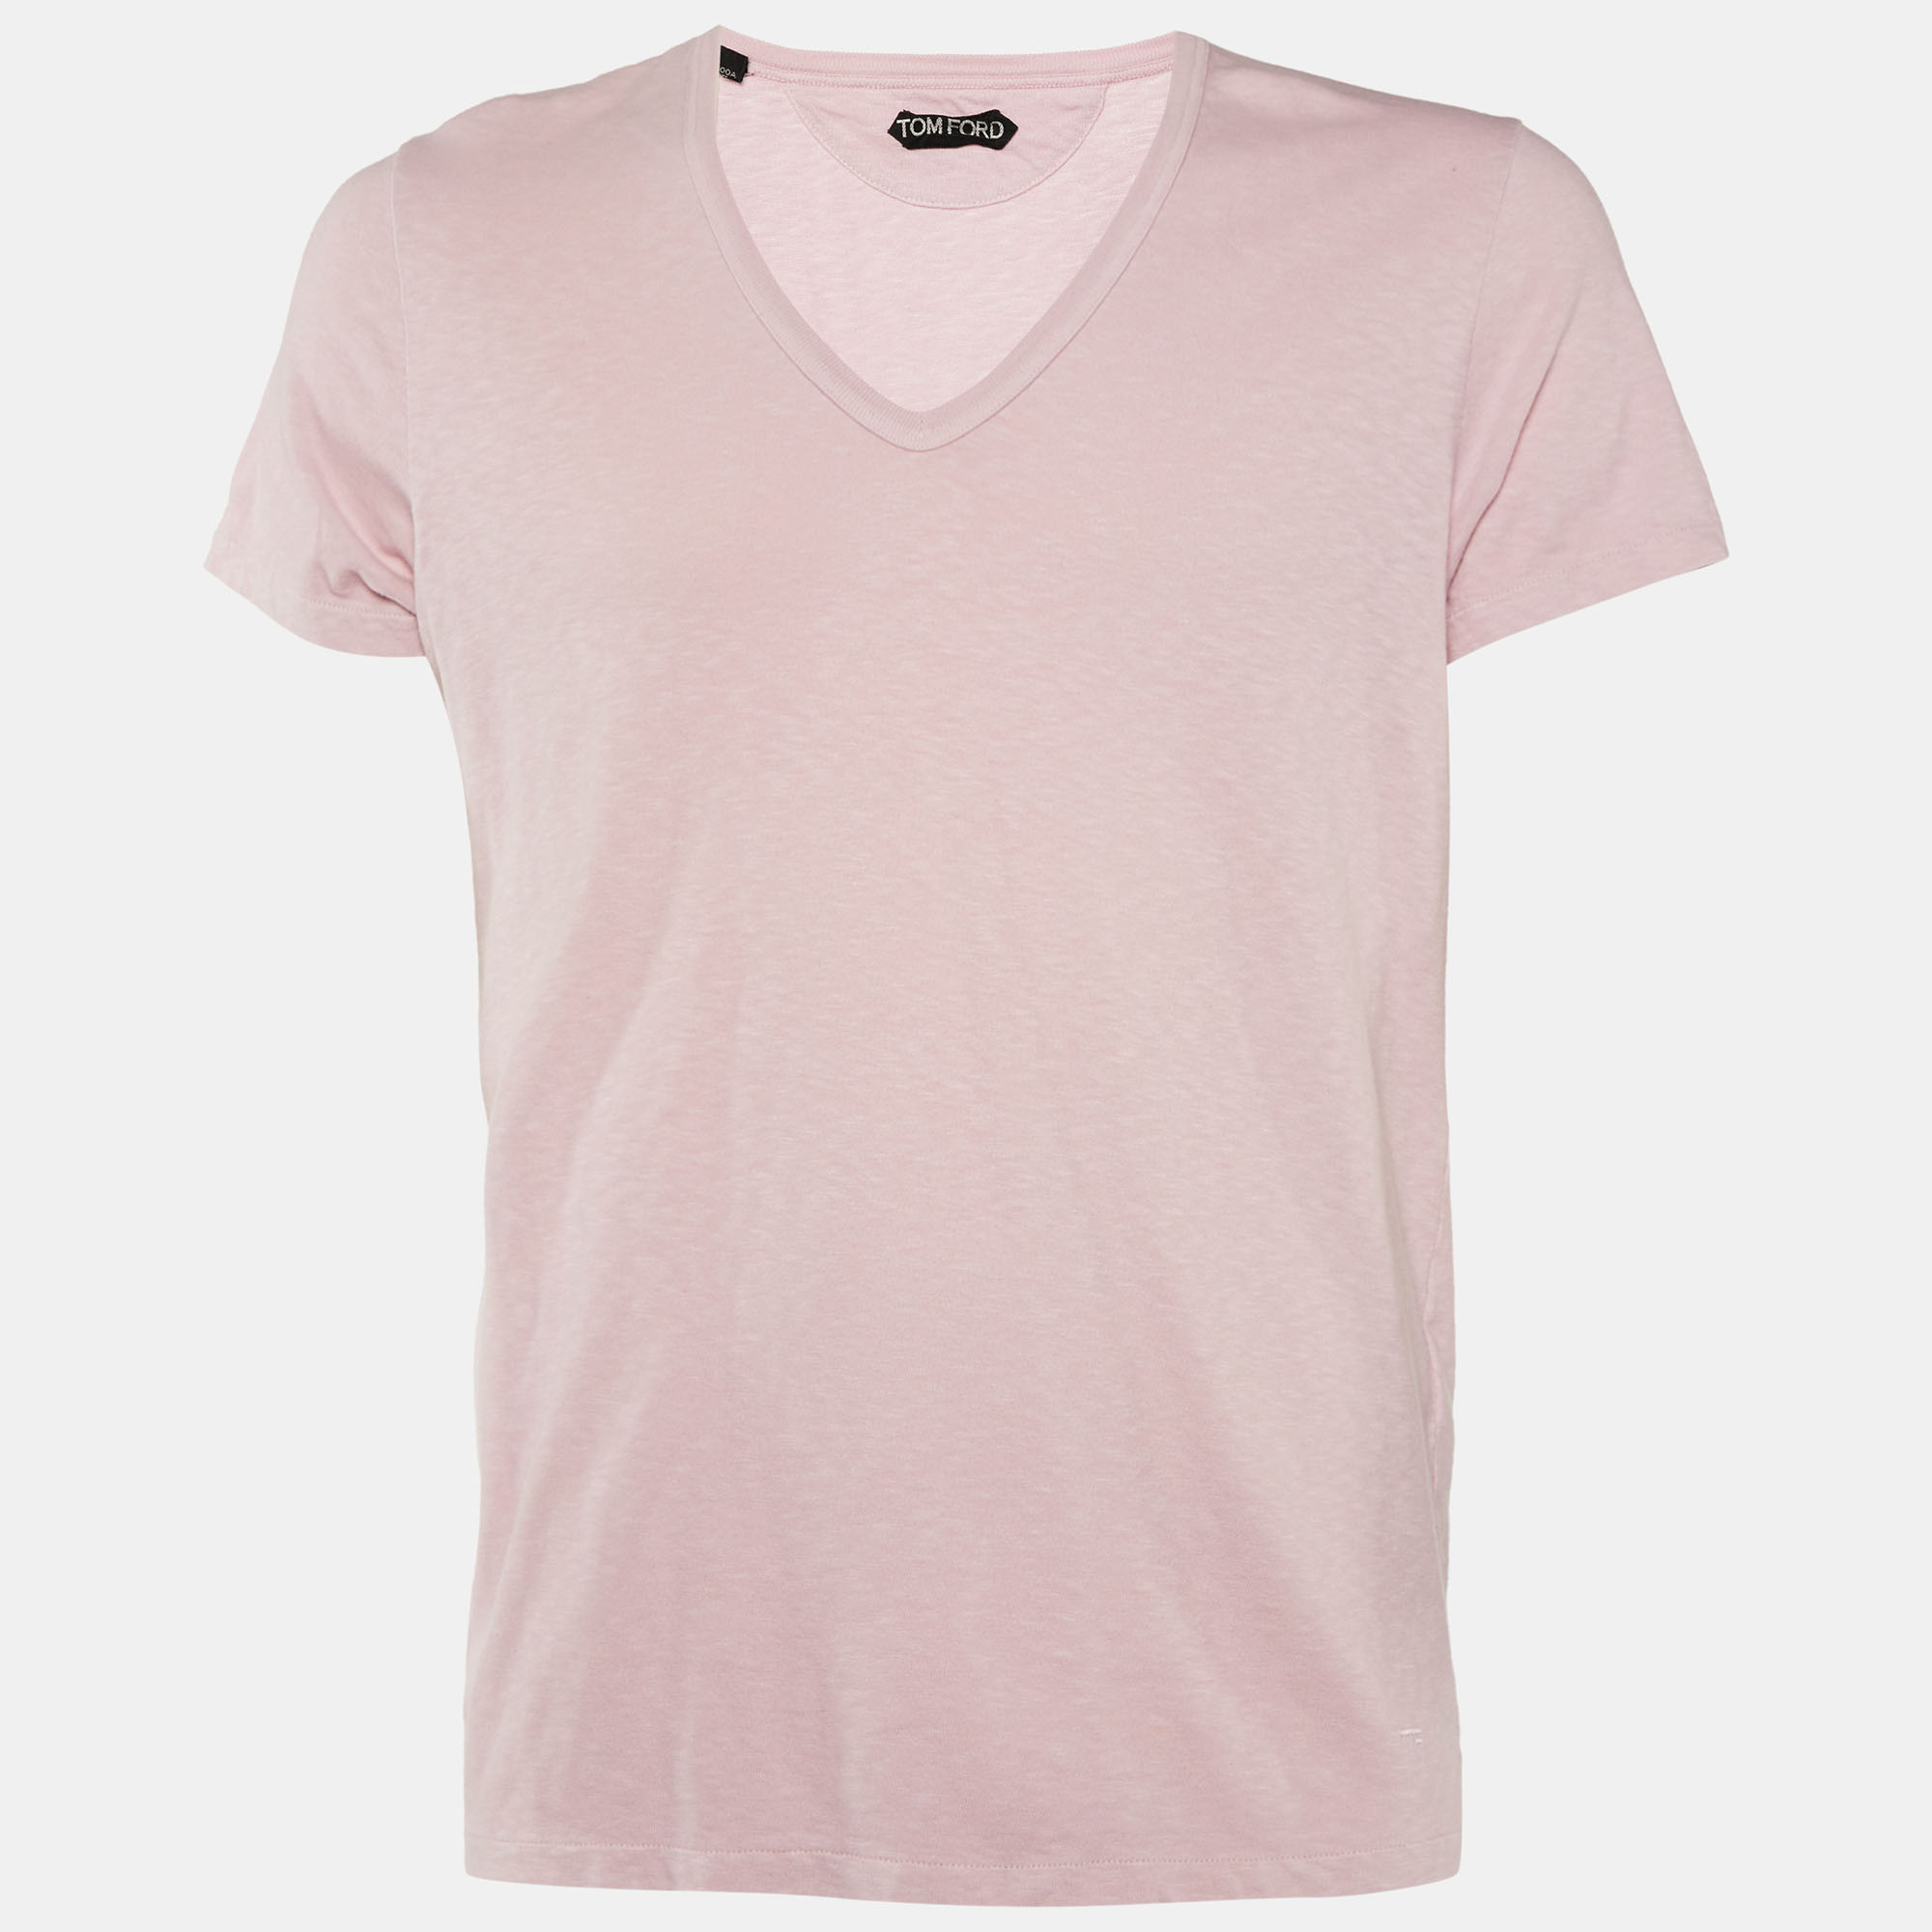 Pre-owned Tom Ford Light Pink Cotton Knit V-neck T-shirt Xl